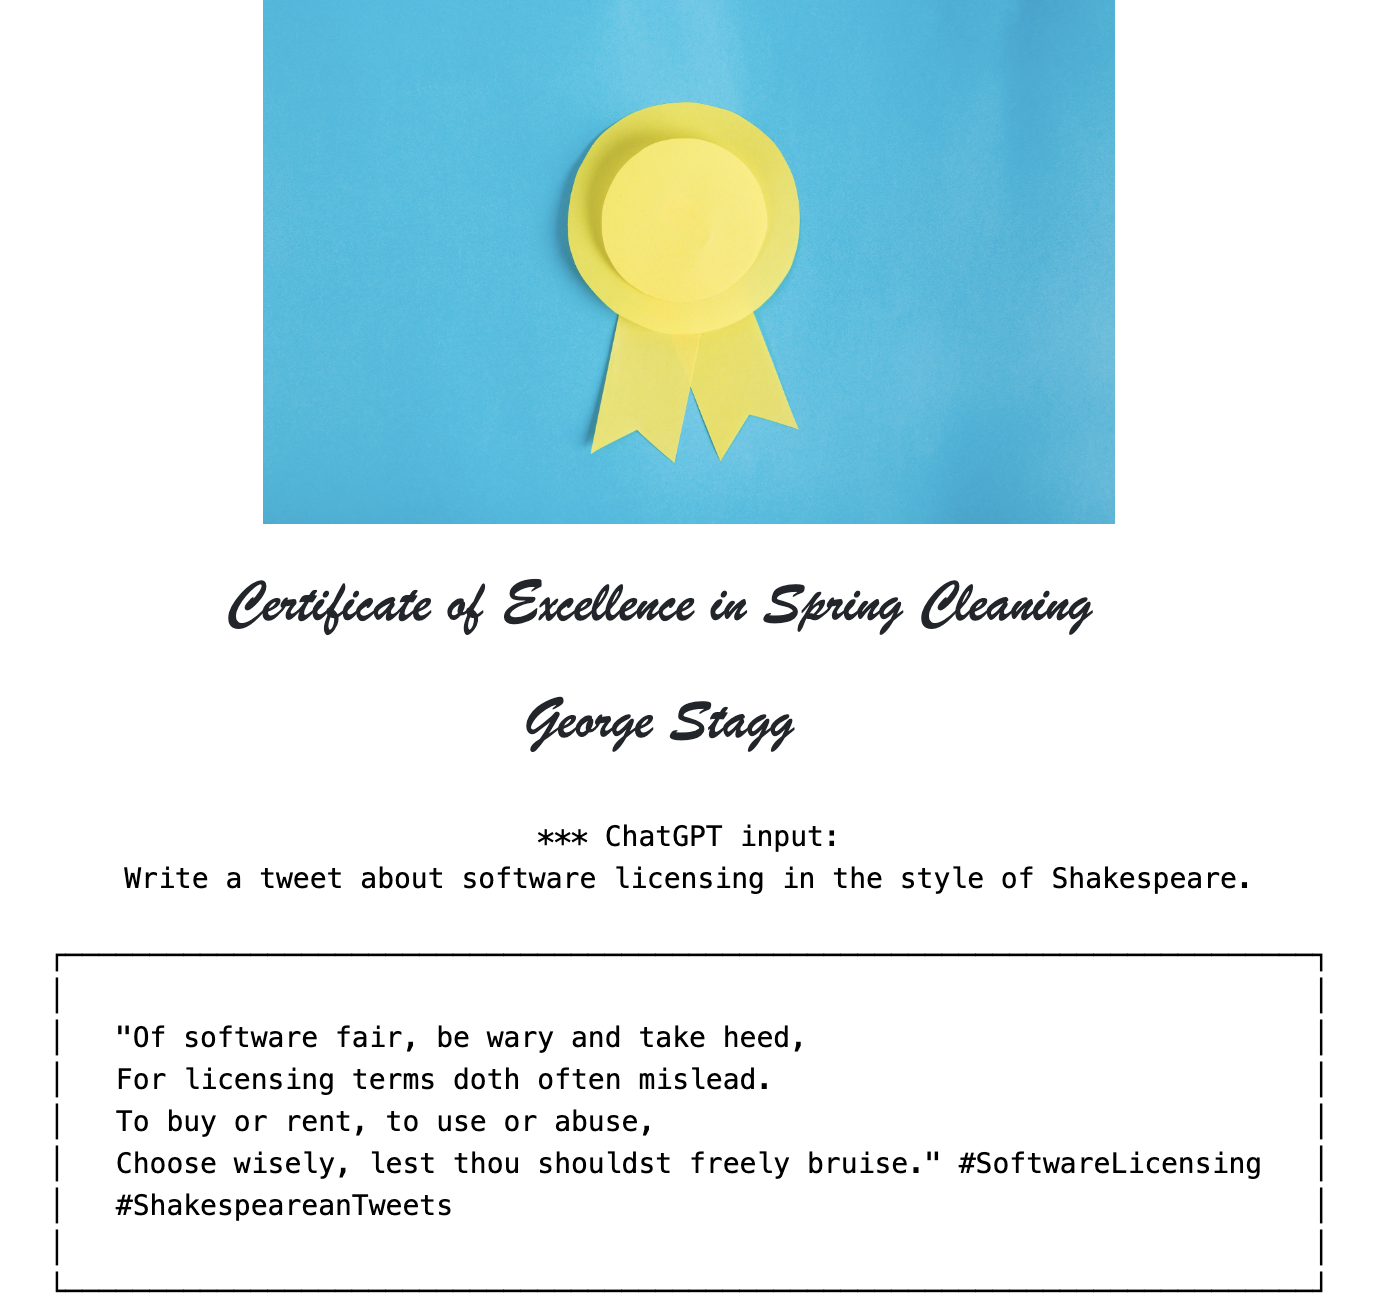 A certificate of excellence in Spring Cleaning for George Stagg, with AI-generated text in the form of a tweet about software licensing in the style of Shakespeare. The generated text says: "Of software fair, be wary and take heed, For licensing terms doth often mislead. Choose wisely, lest thou shouldst freely bruise." #SoftwareLicensing #ShakespeareanTweets